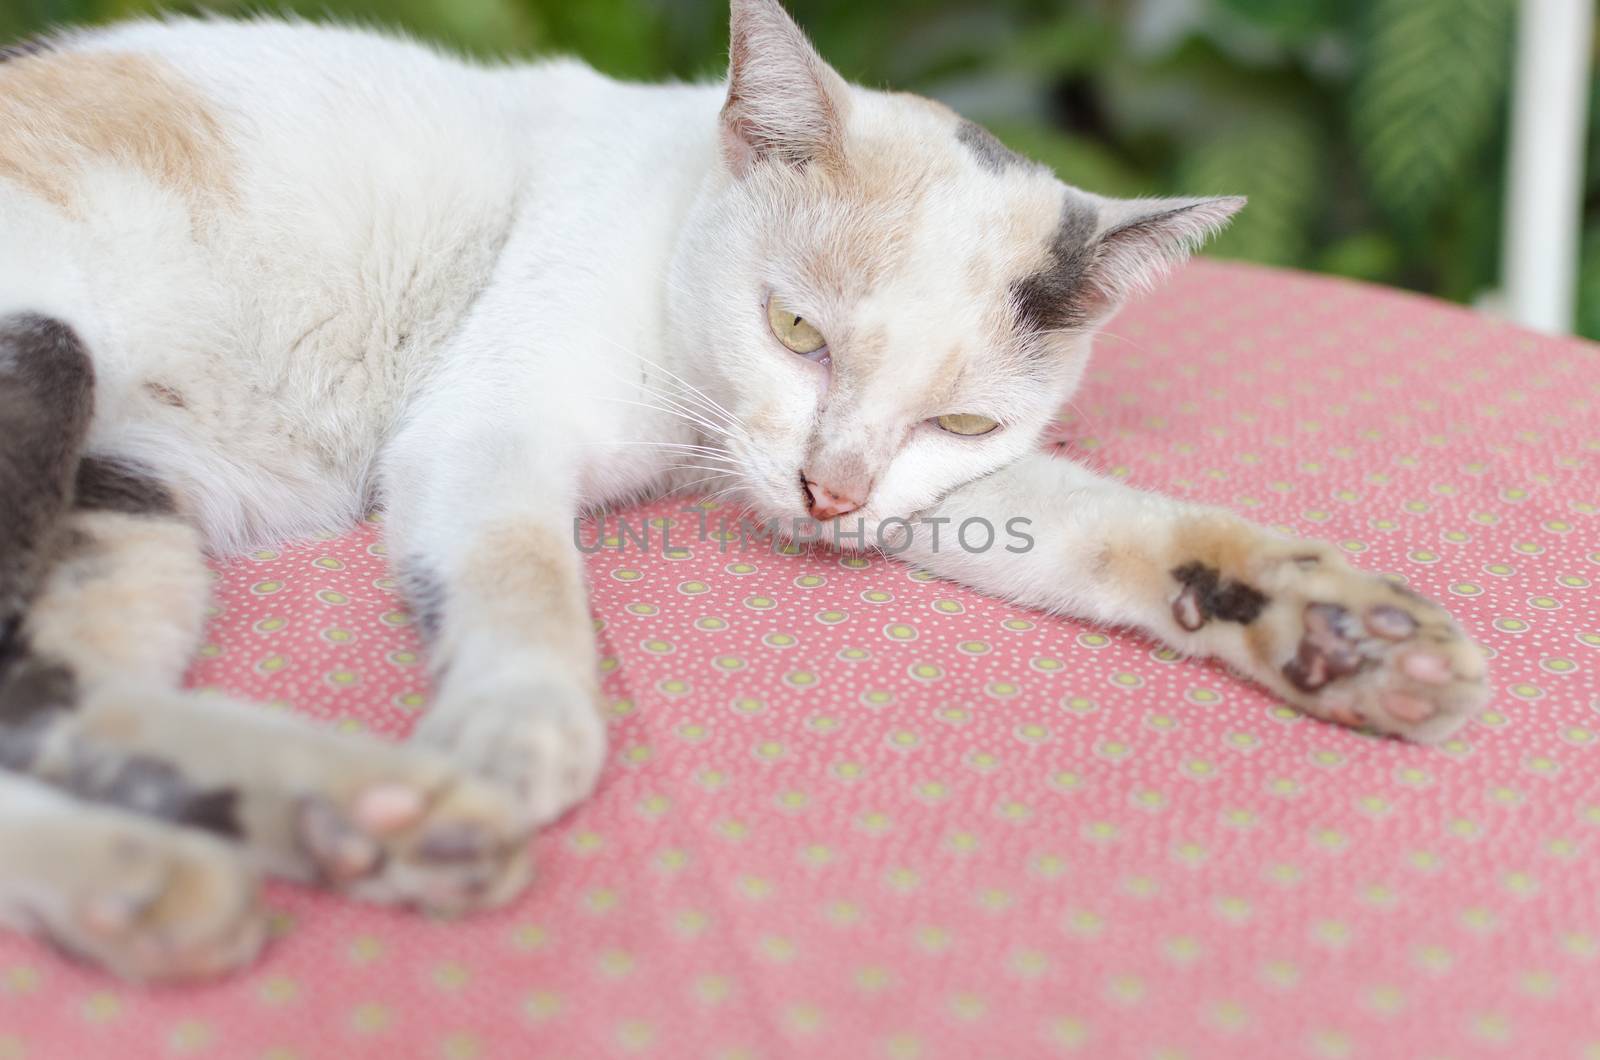 Little white kitten portrait up on pink table and green nature background.